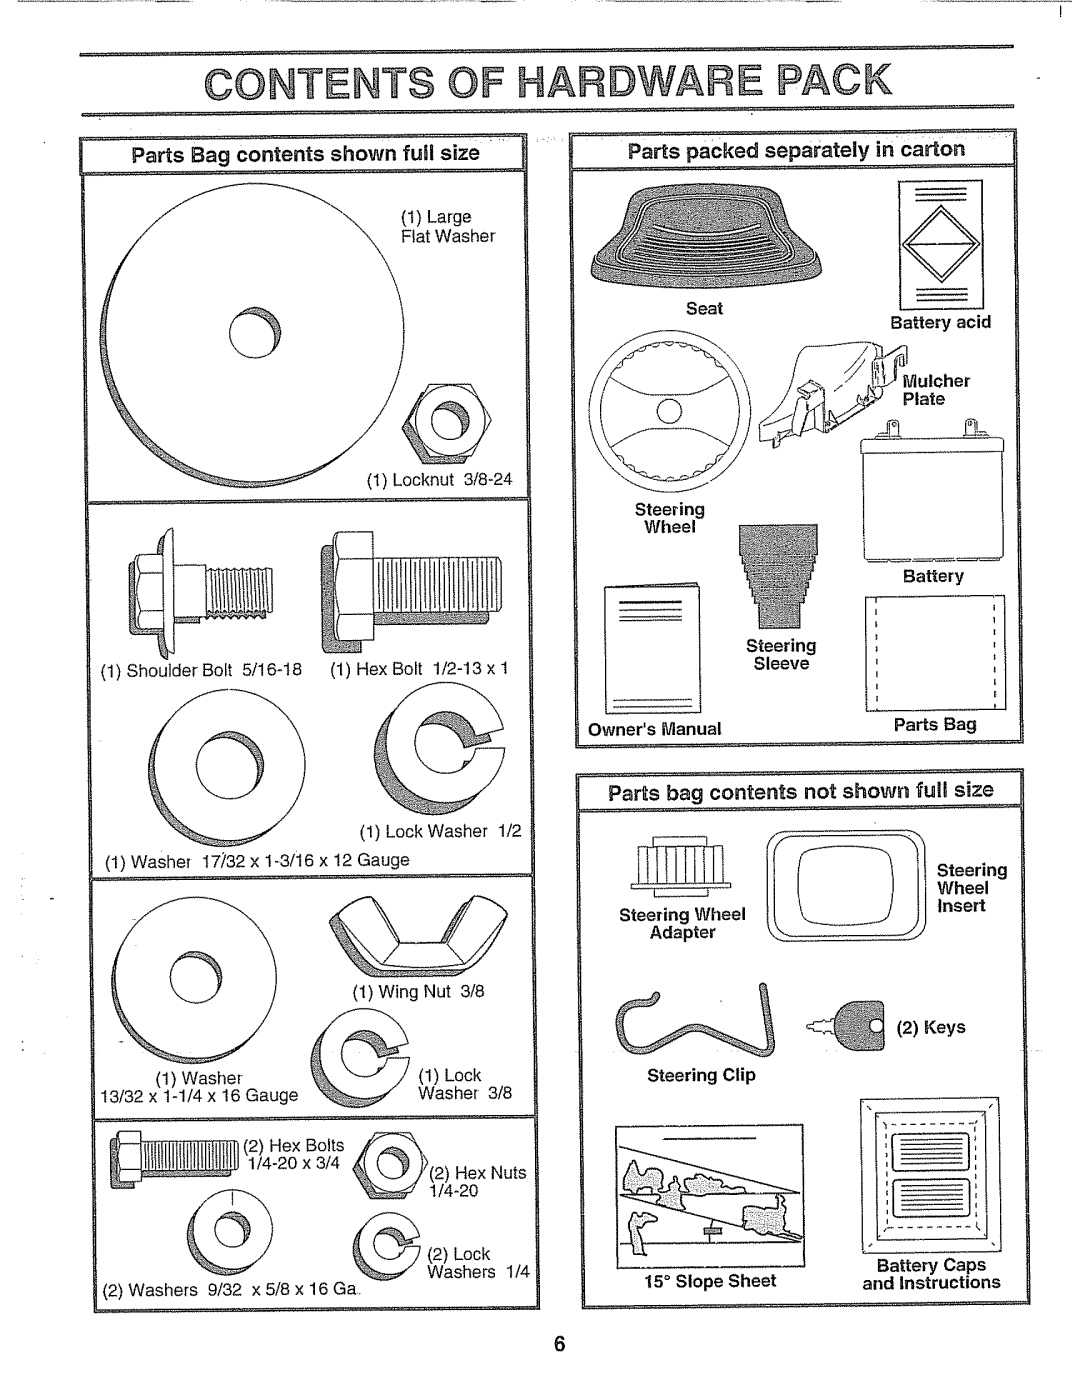 Craftsman 917.25693 Contents Of Hardware Pack, i_L _ Plate, Parts Bag contents shown furl size, Steering Sleeve, Wheel 